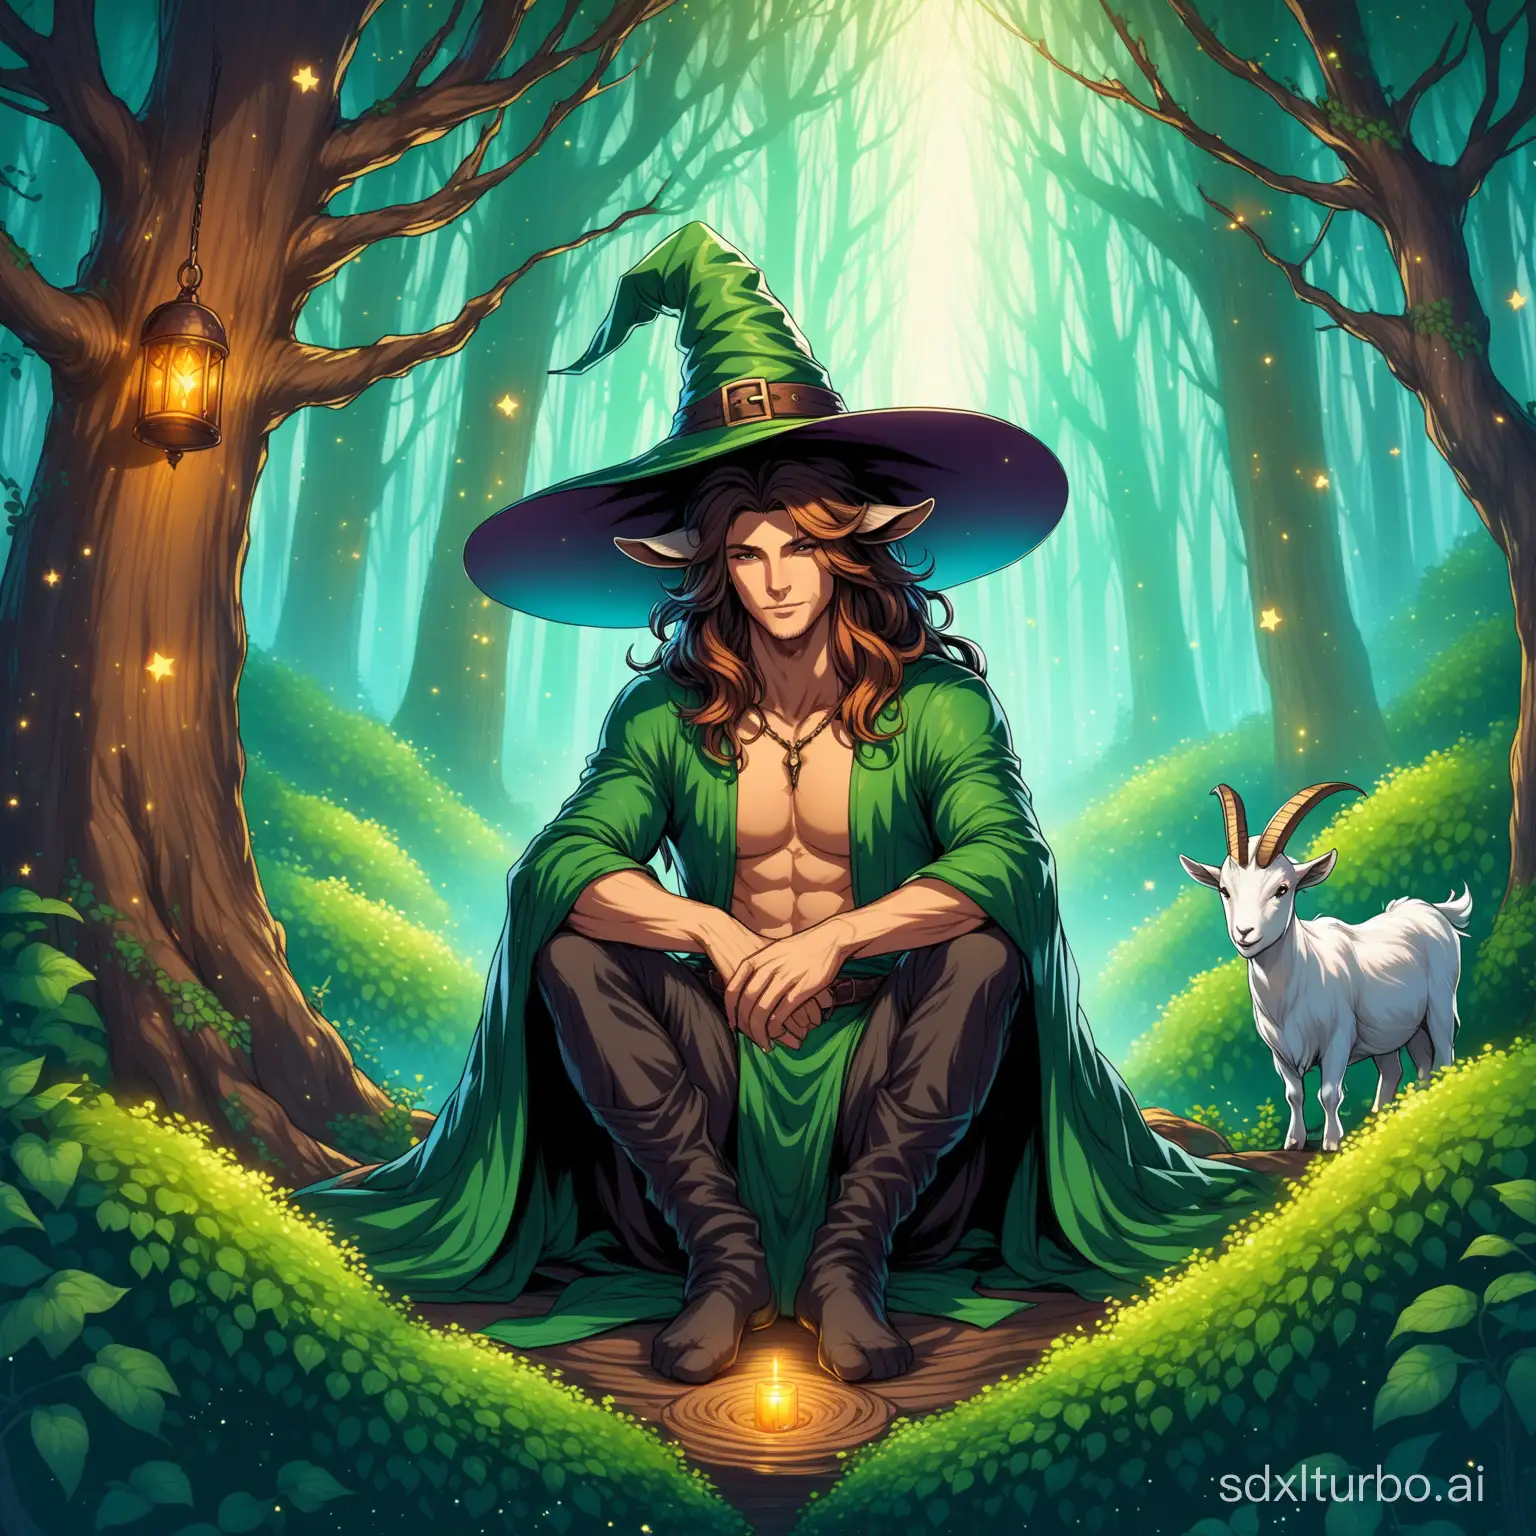 Chad-Male-Goat-with-Witch-Hat-in-Enchanted-Forest-Fantasy-Art